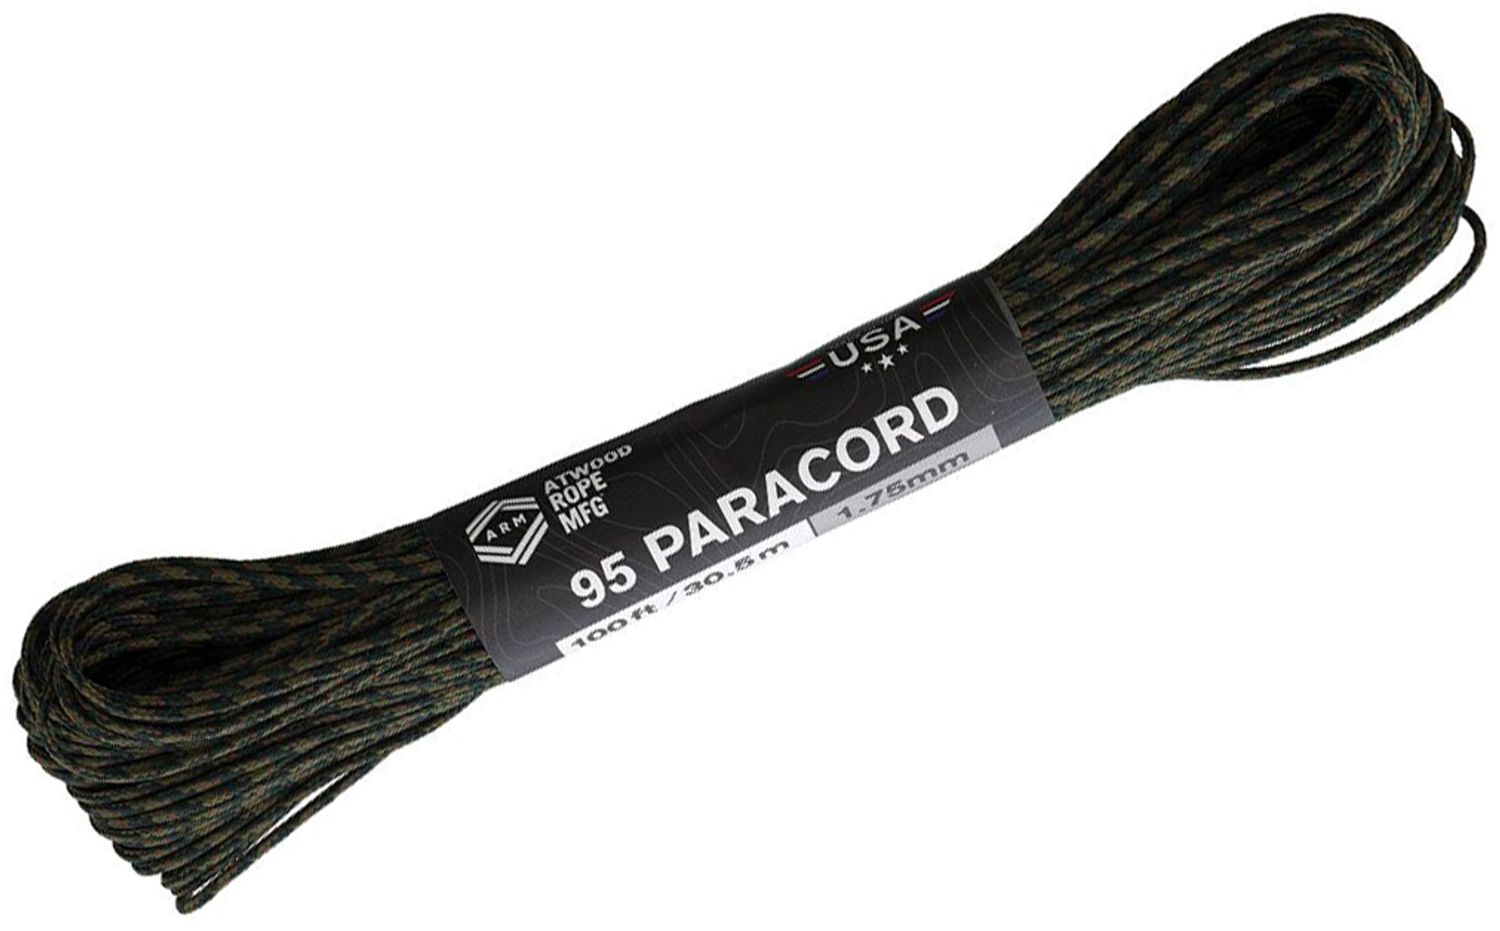 Atwood Rope 95 Paracord, Woodland Camo, 100 Feet - KnifeCenter